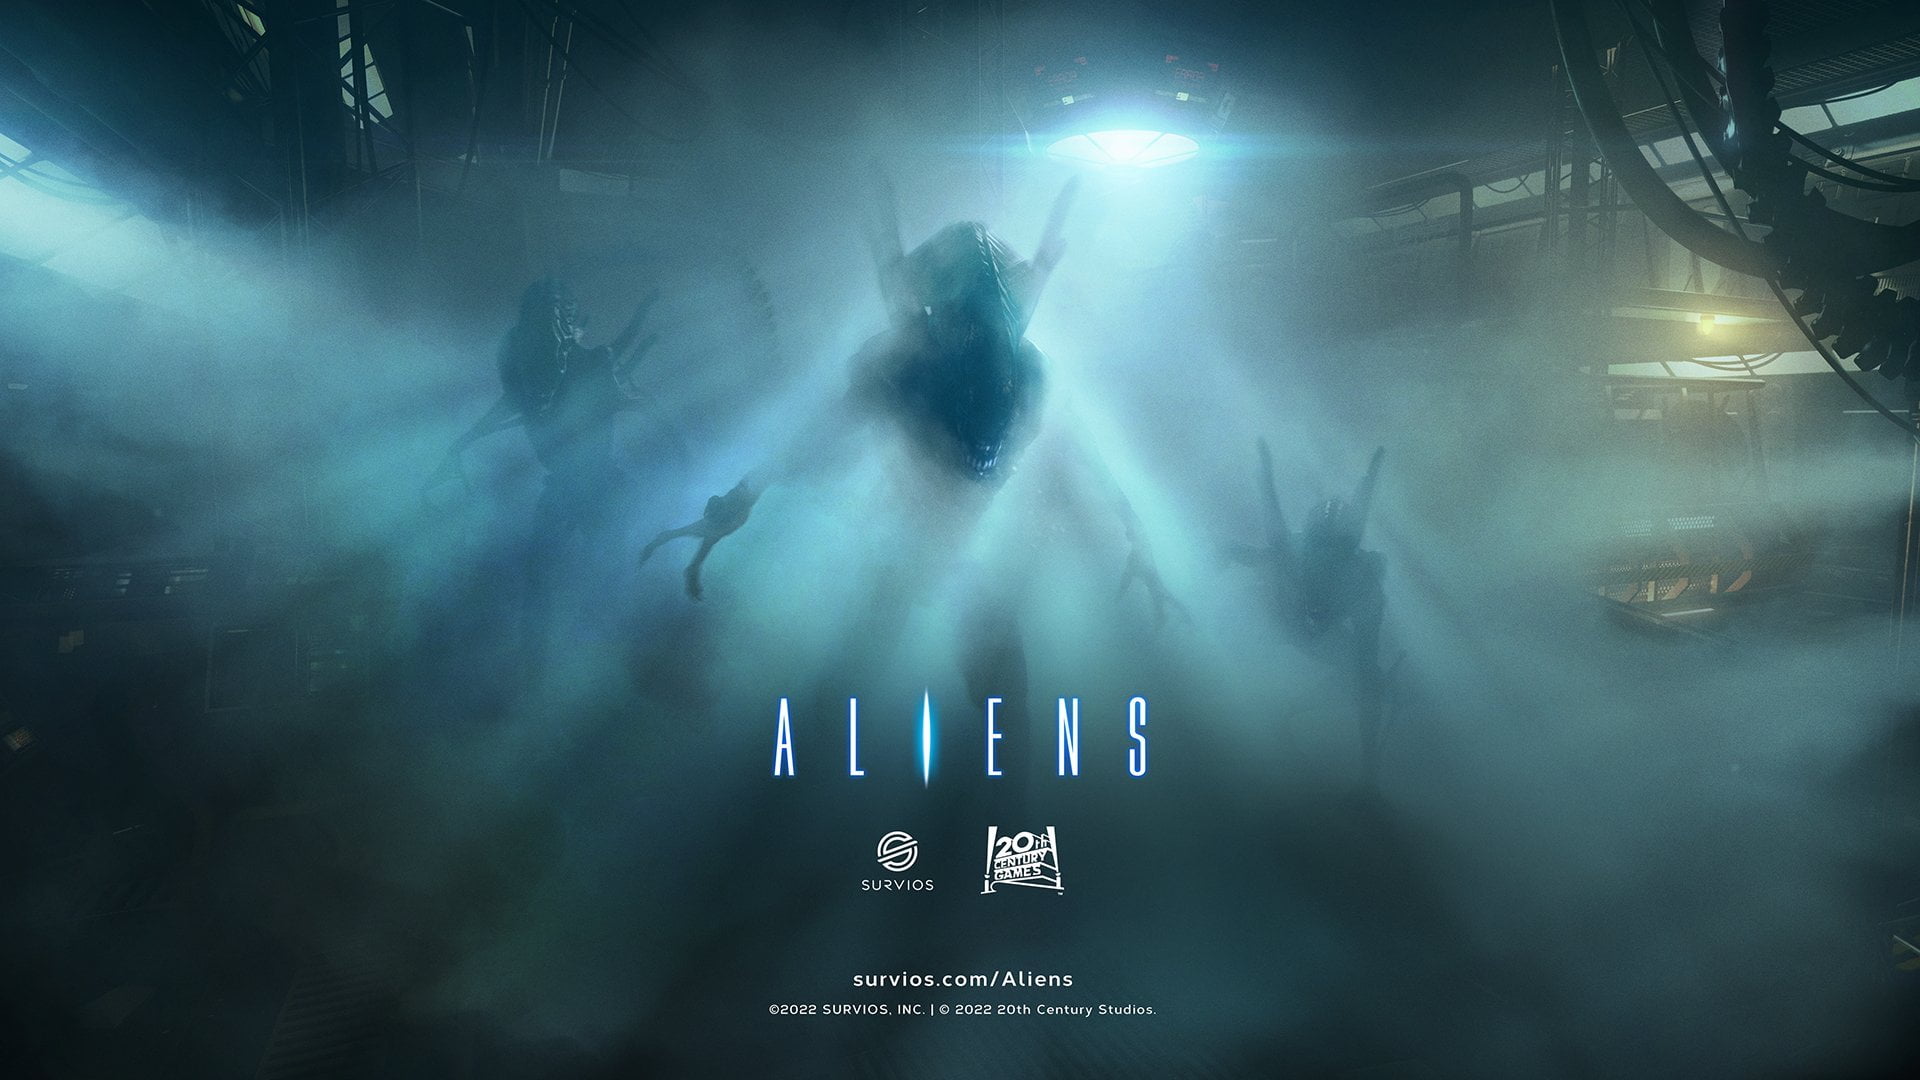 A new Alien game is in the works - and it's coming for VR